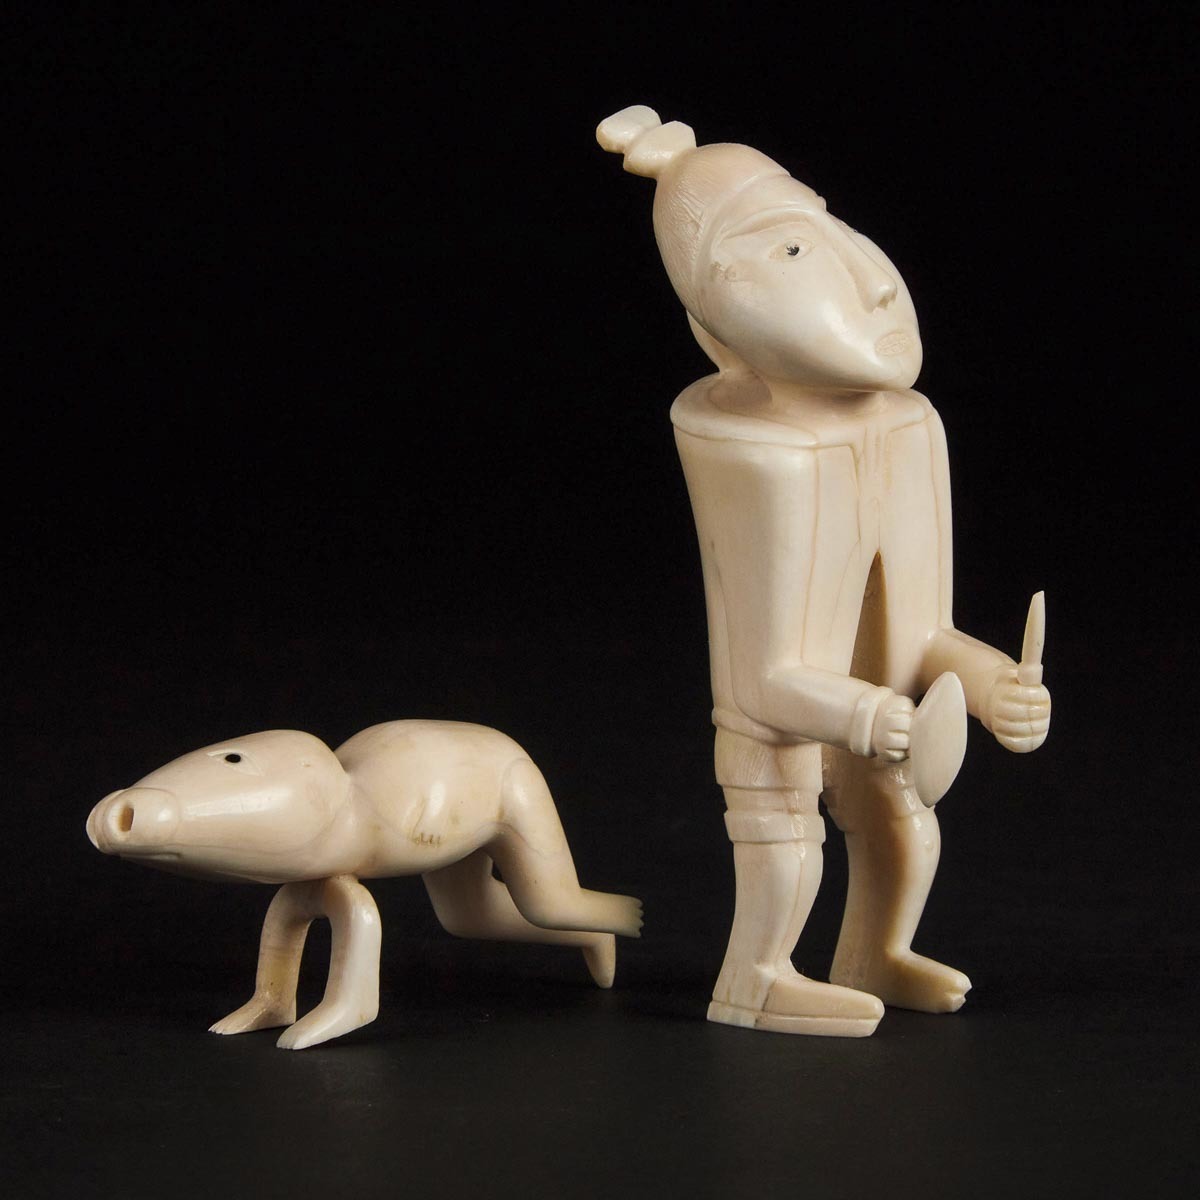 Unidentified Artist, PAIR OF TUPILAQS, ivory, largest 4.75 x 2 x 1.5 in — 12.1 x 5.1 x 3.8 cm - Image 2 of 3